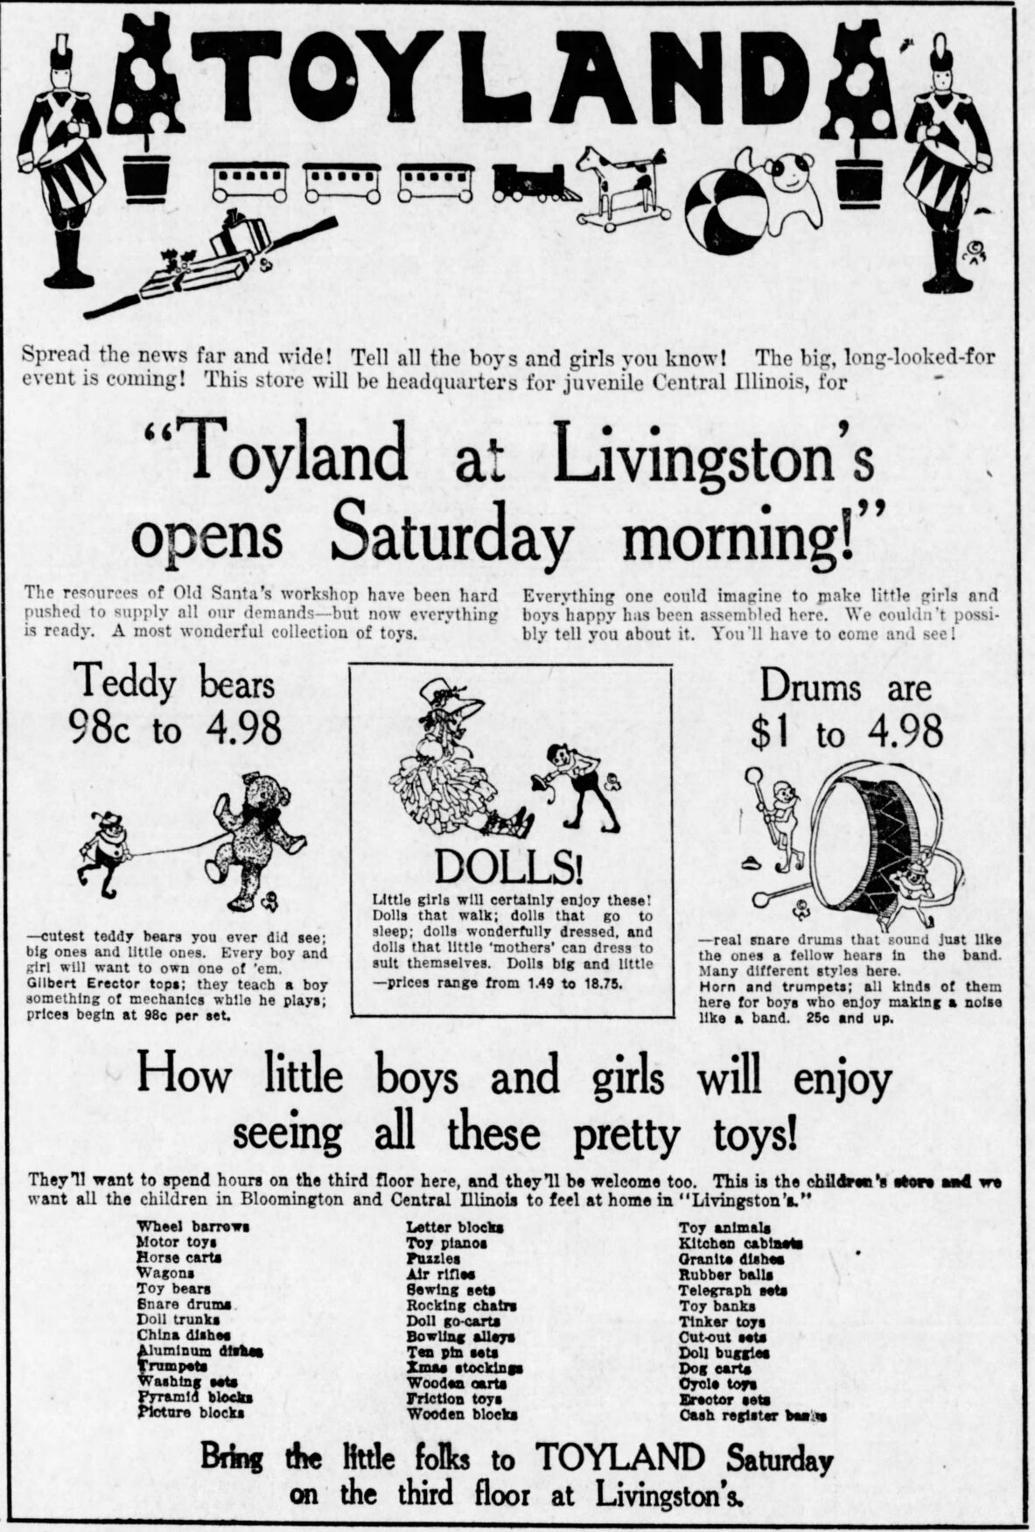 Times Gone Buy: Vintage Livingston's ads from The Pantagraph